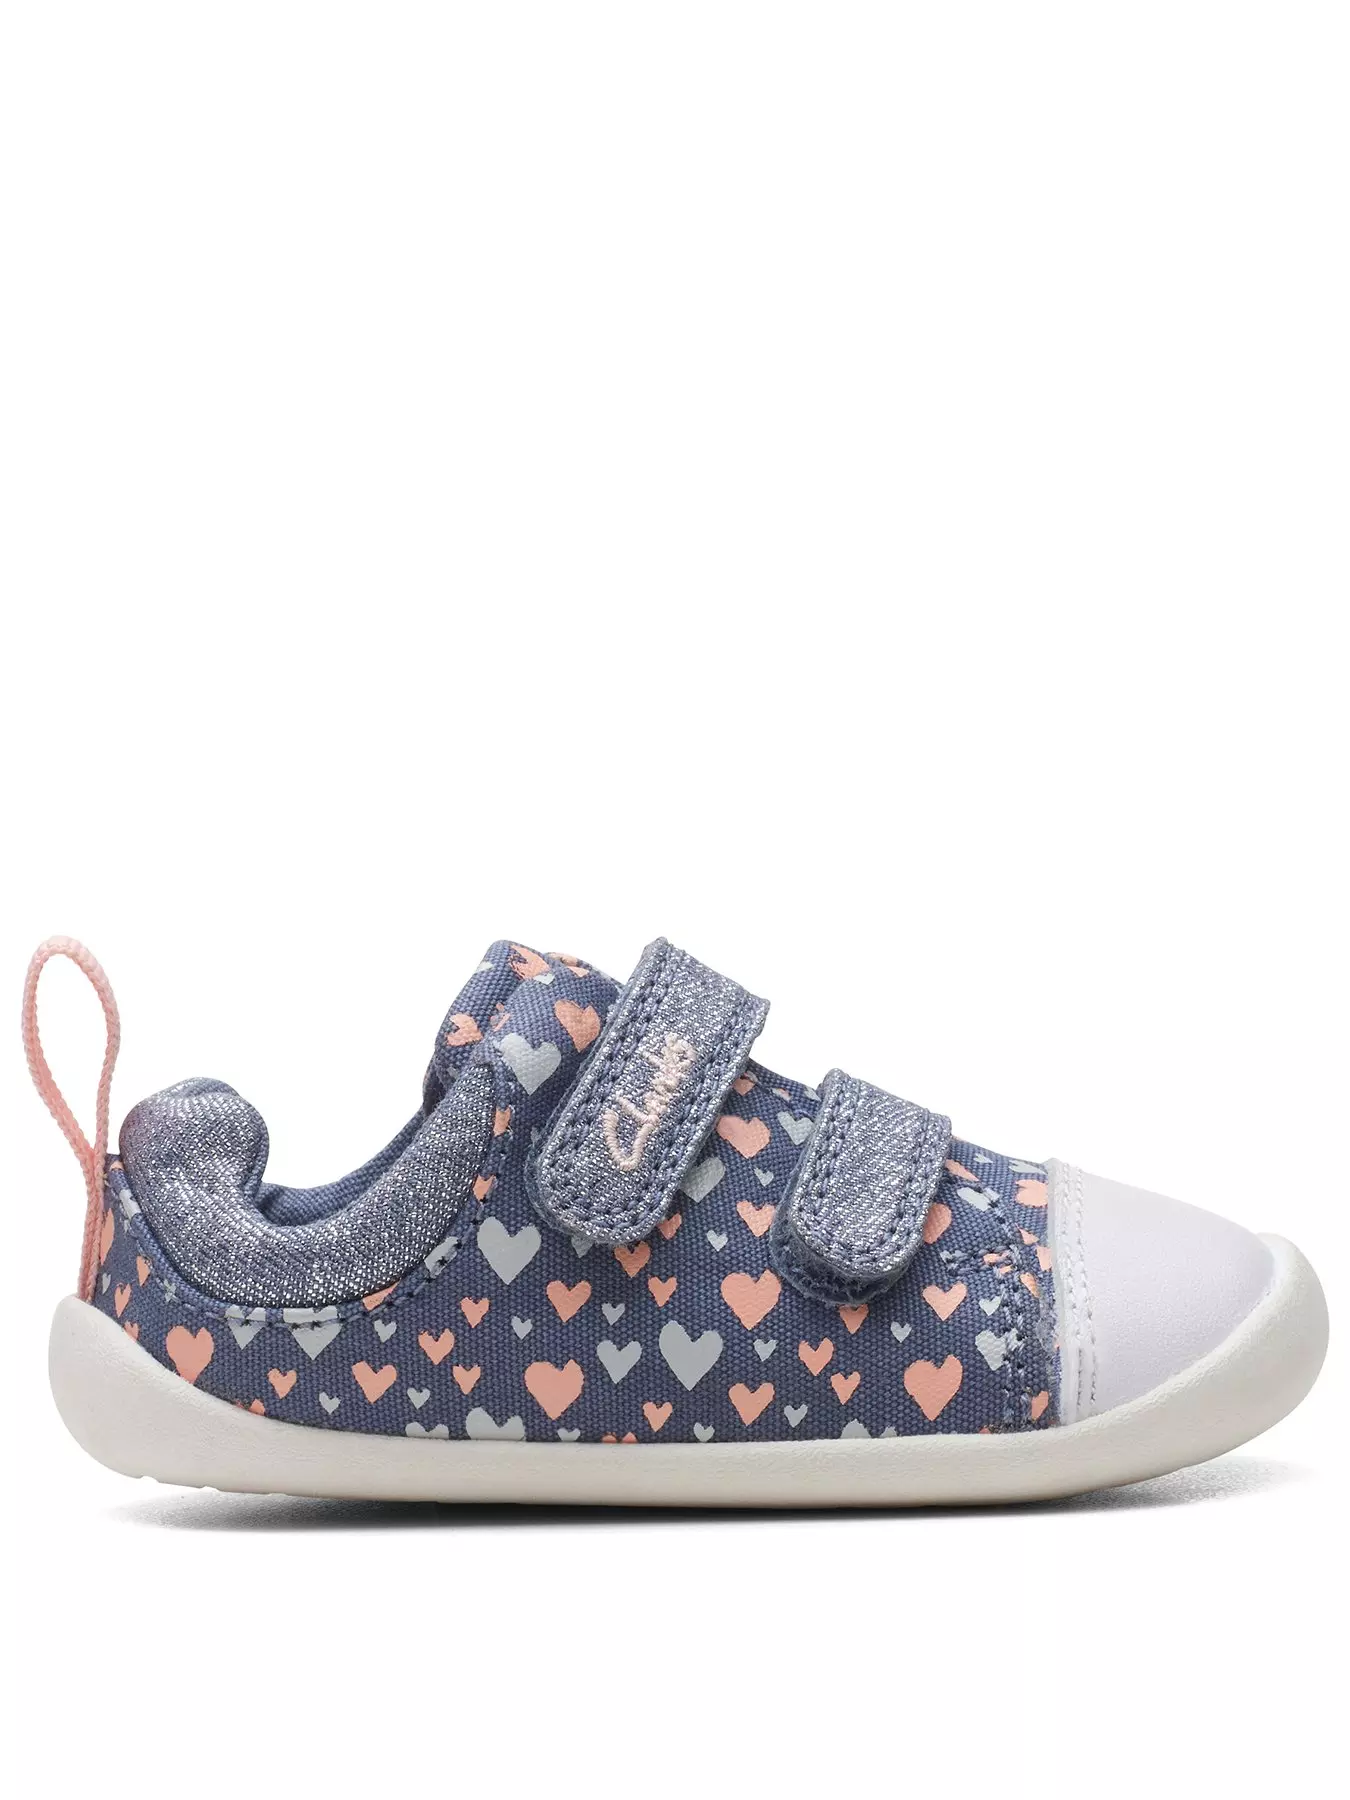 Kids Shoes Clarks Children's Shoes | Very.co.uk